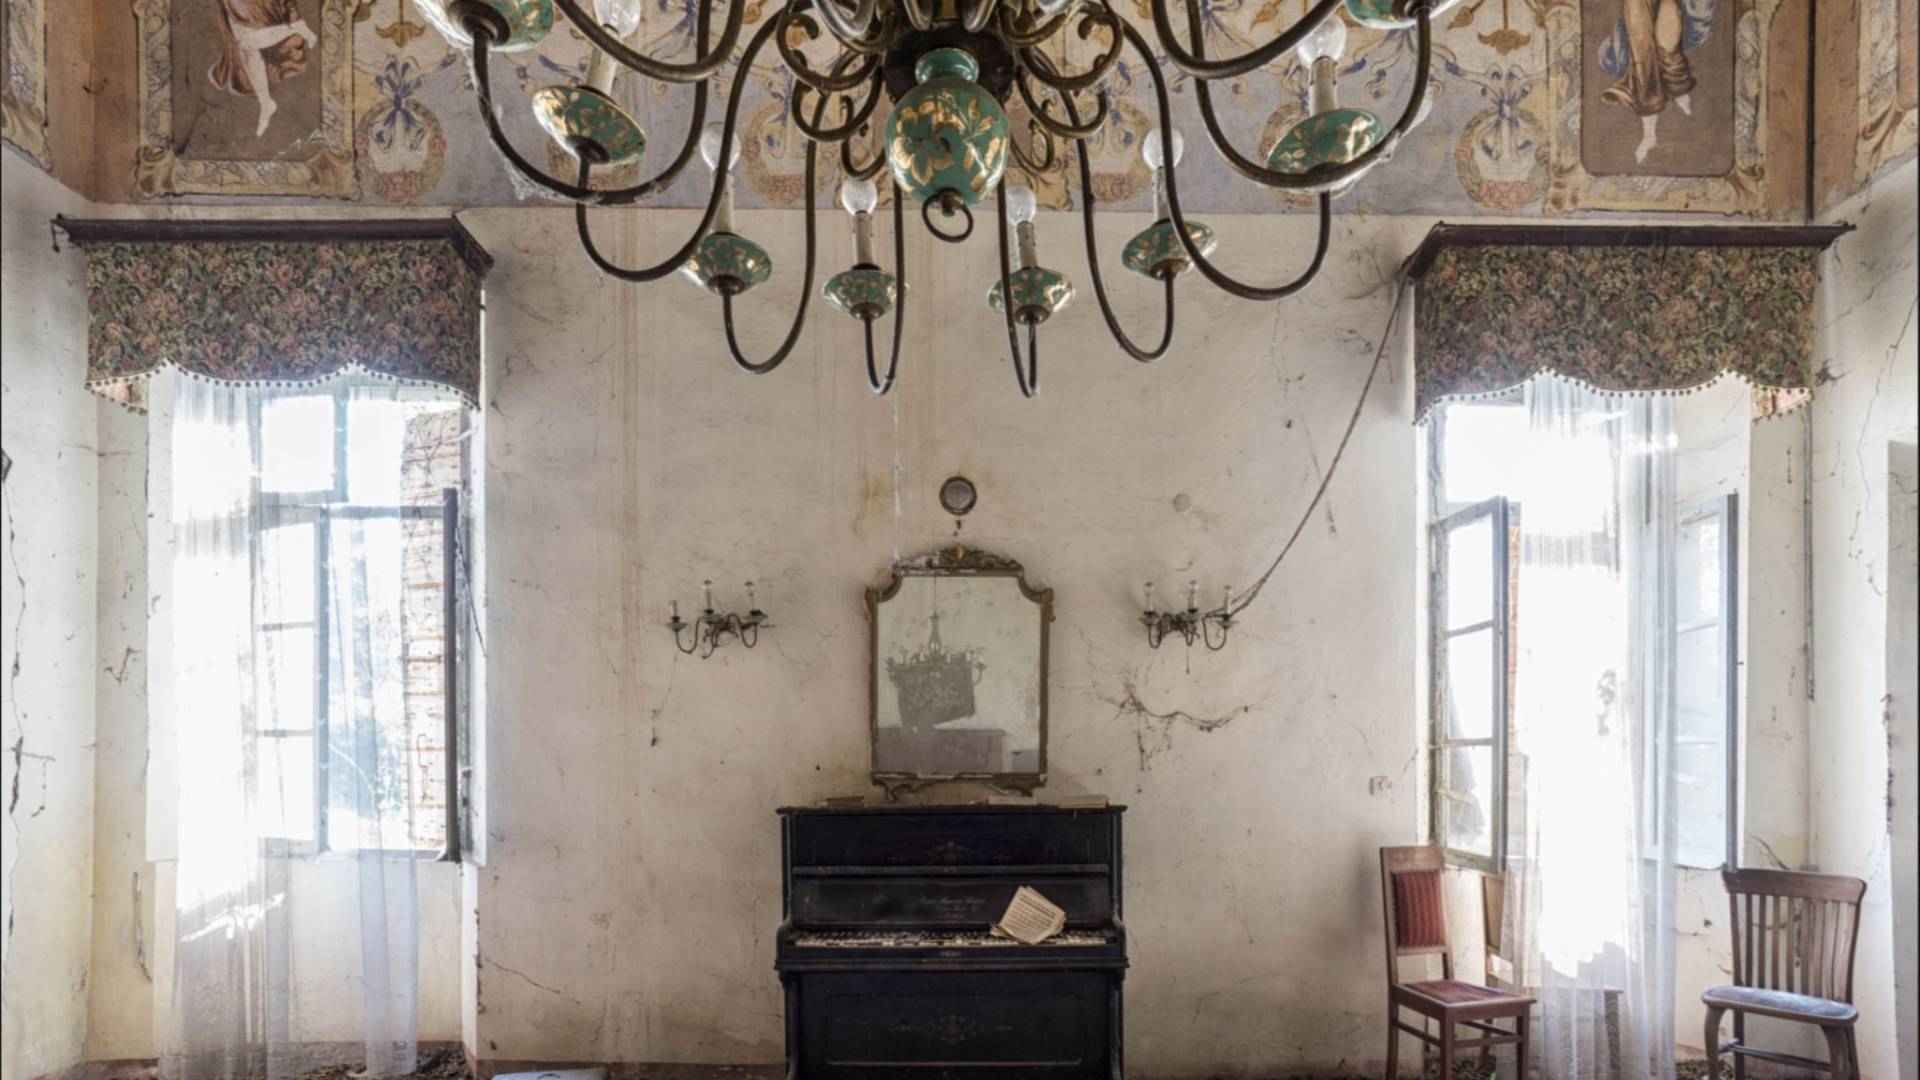 Piano sits in abandoned room with chandelier.